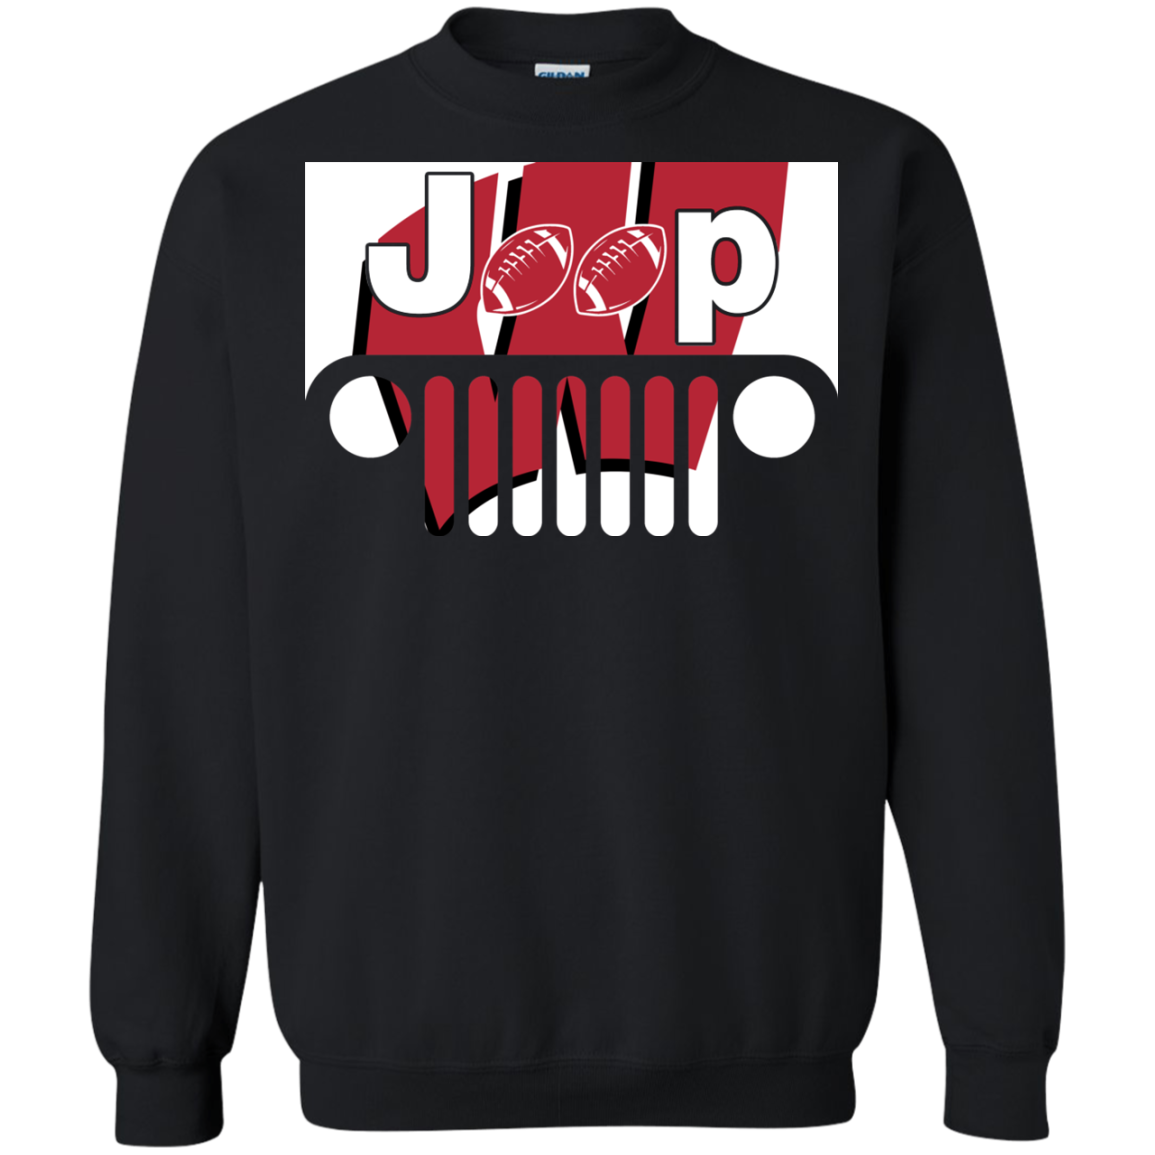 Wisconsin Badgers - Jeep T-shirts S Sweat Shirts S